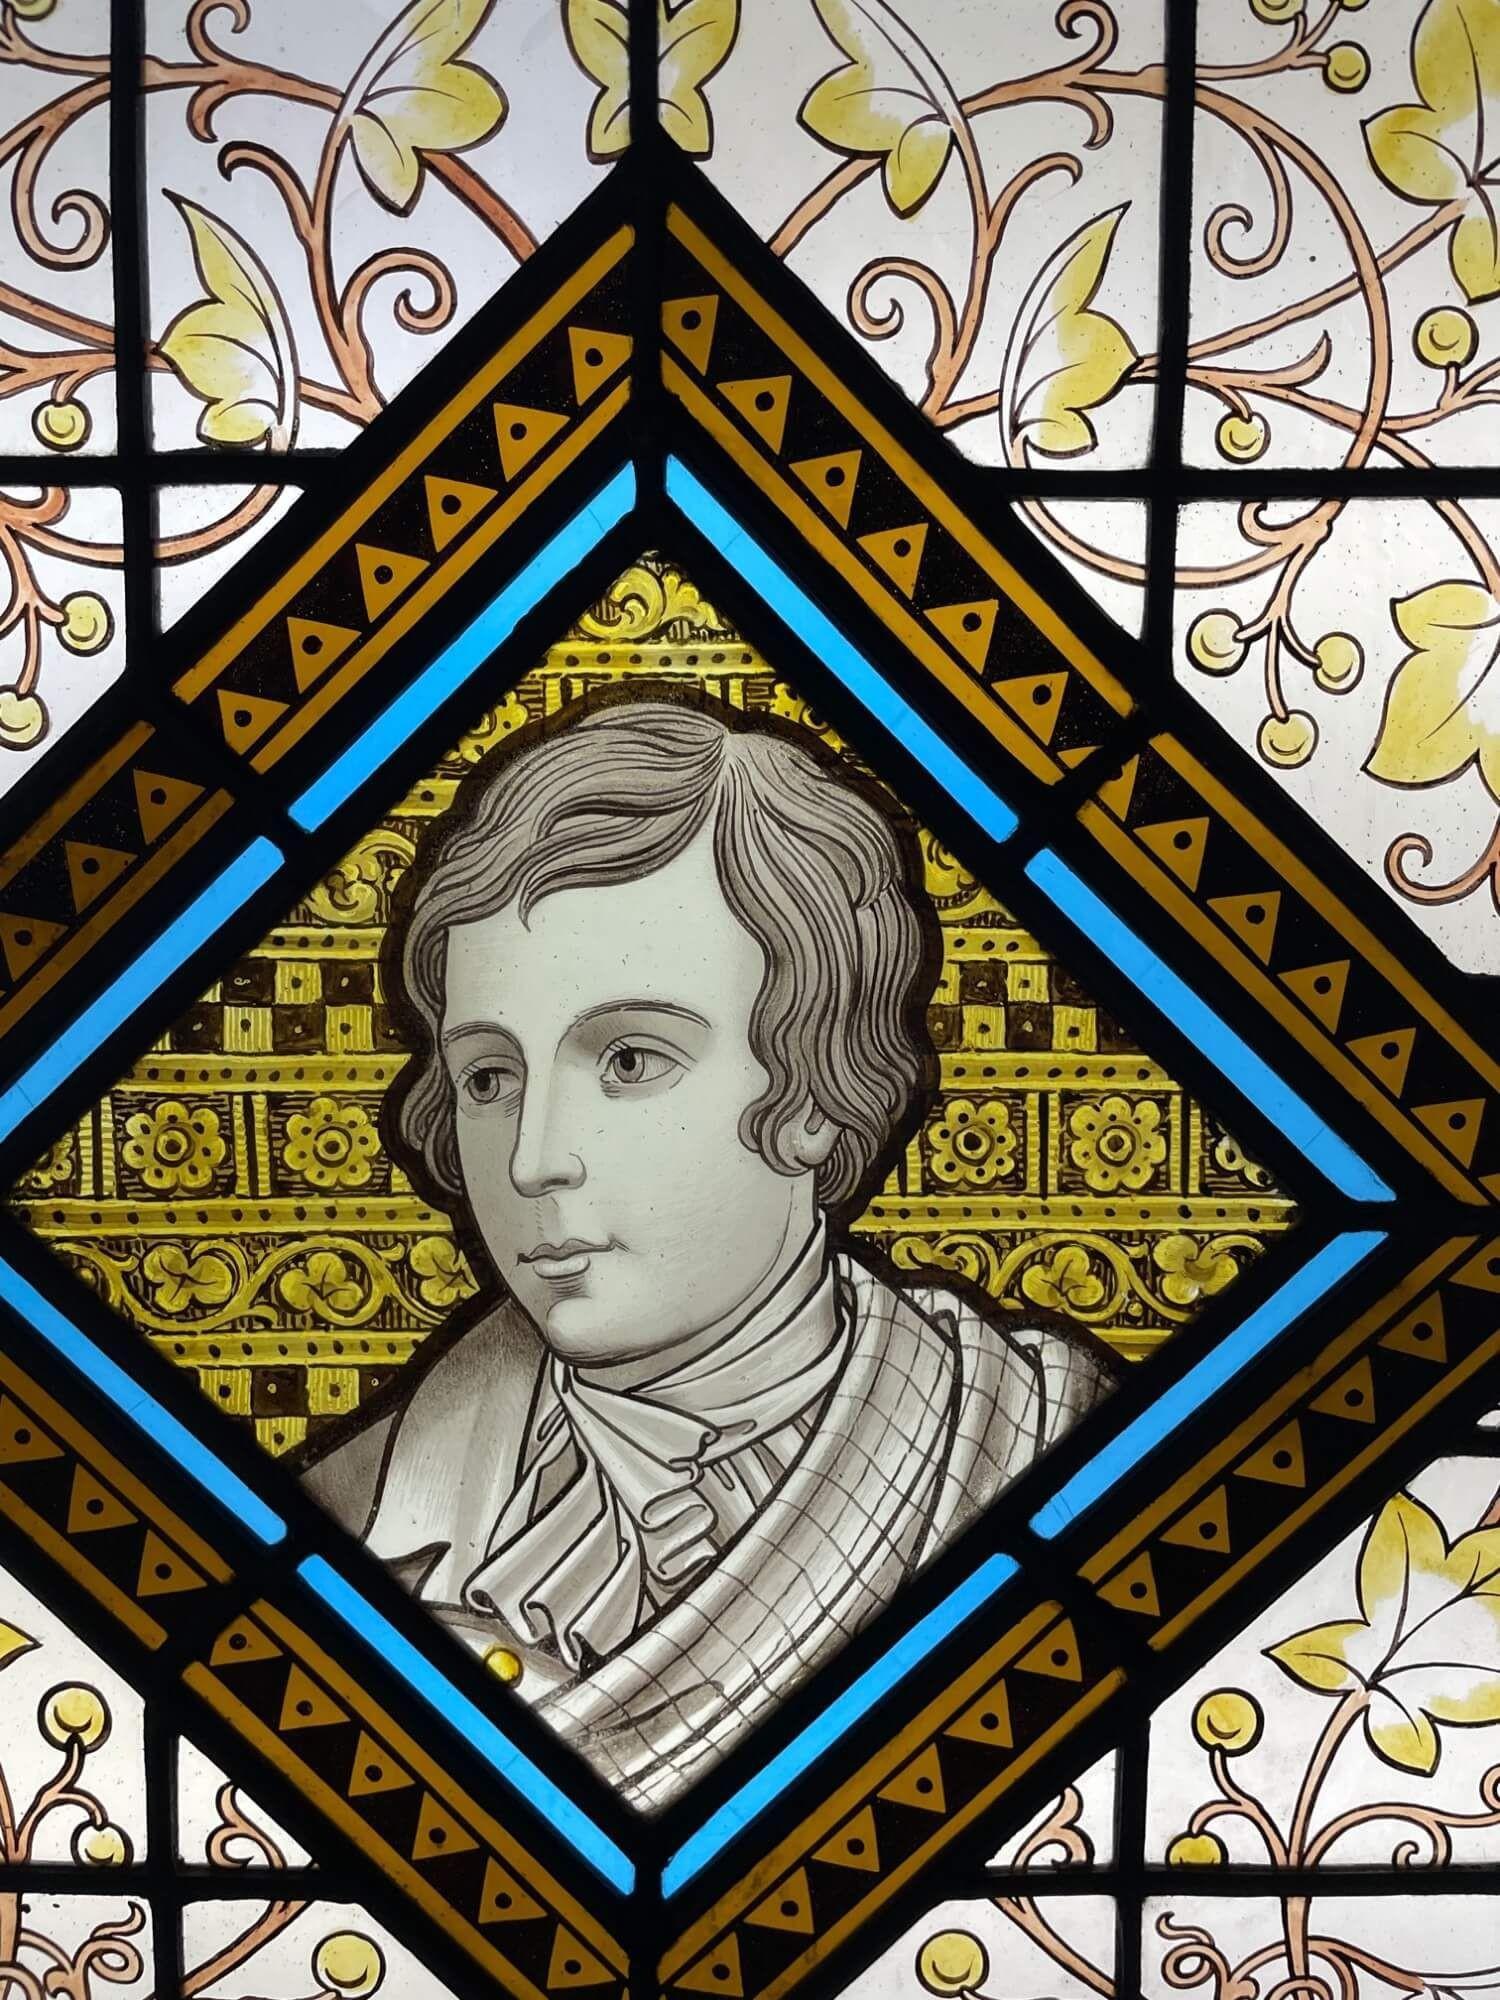 A late 19th century antique stained glass window panel depicting Robert Burns, one of 3 similar we are selling depicting notable figures of British history. At the centre is a distinguishable illustration of Robert Burns, 18th century Scottish